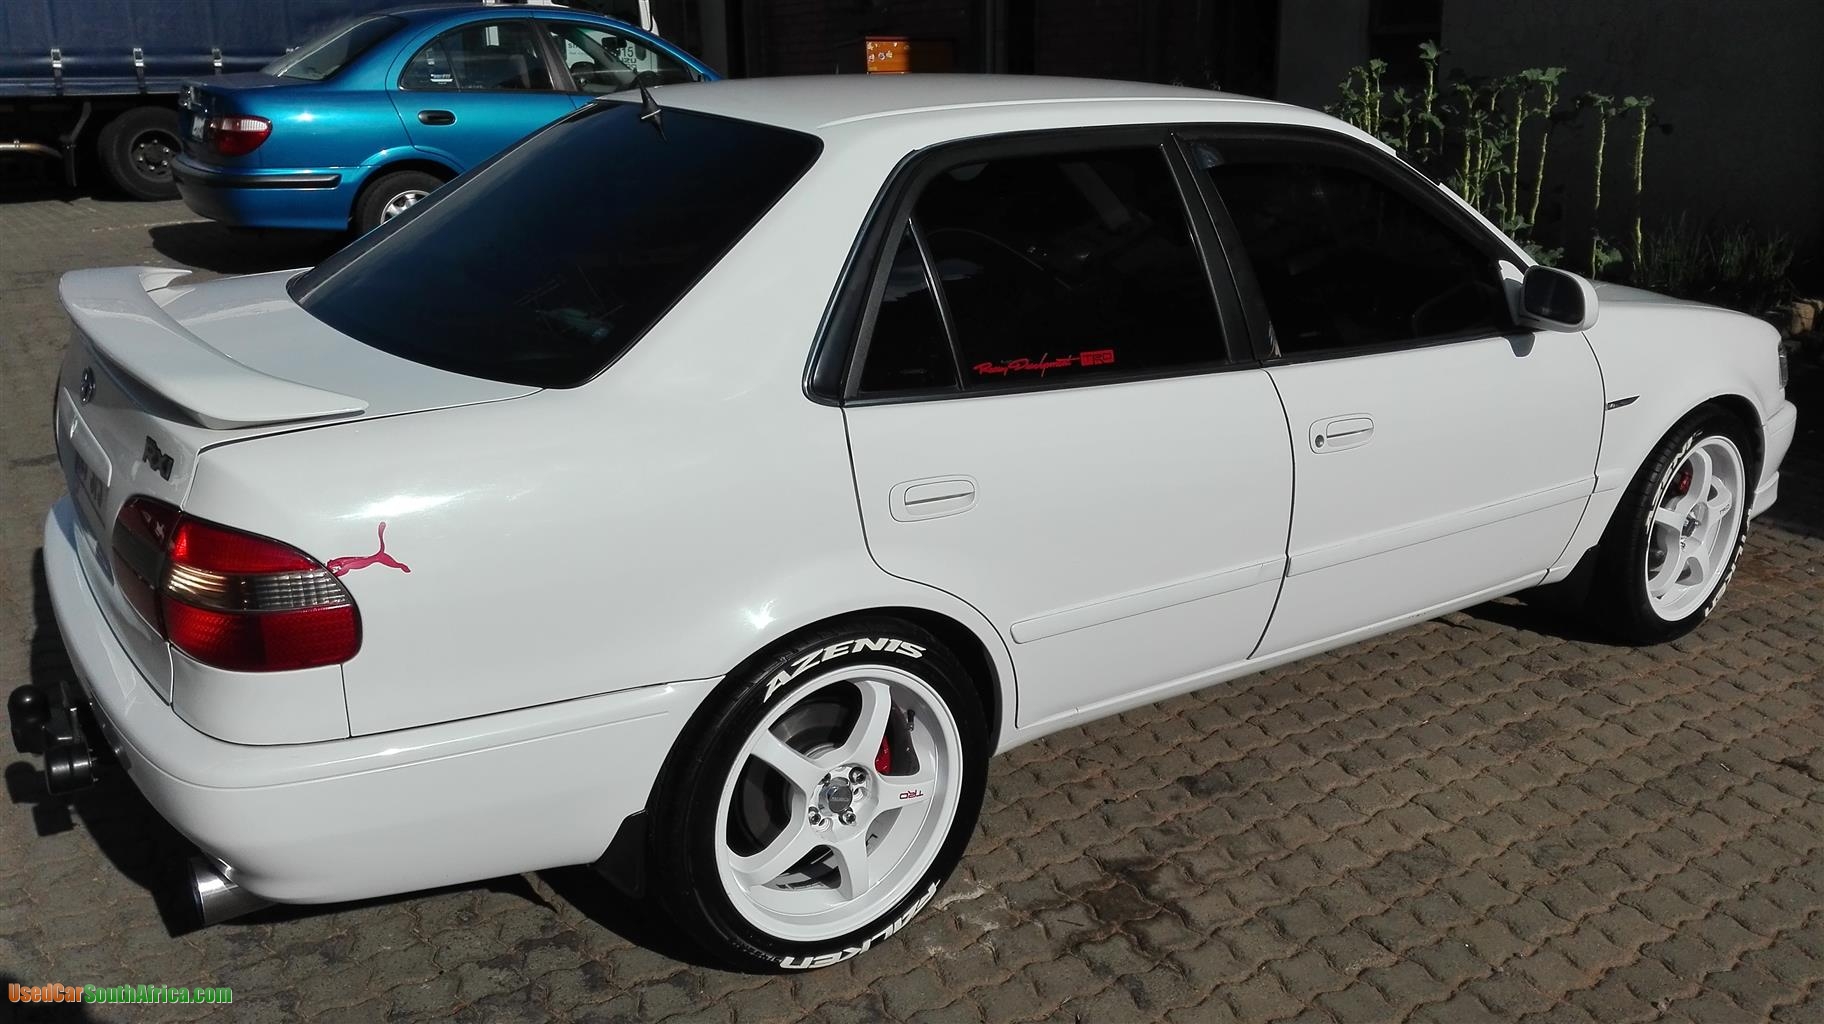 2001 Toyota Corolla 1.6 used car for sale in Johannesburg South Gauteng South Africa ...